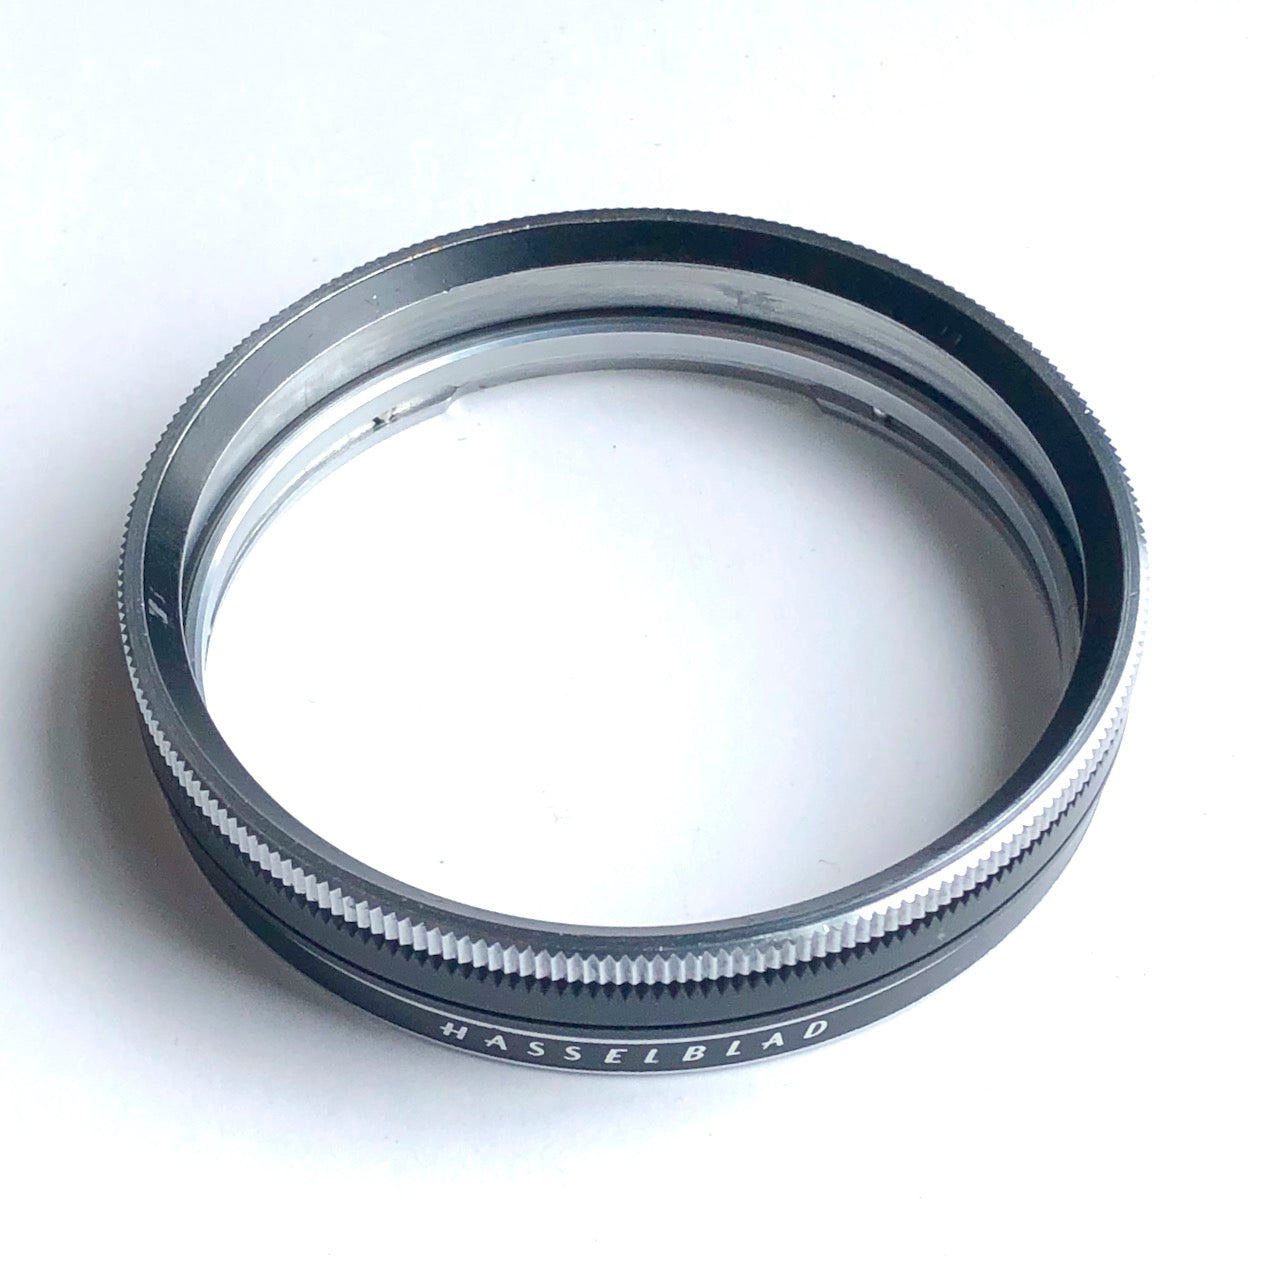 Hasselblad 51638 B60 adapter for 63mm filters